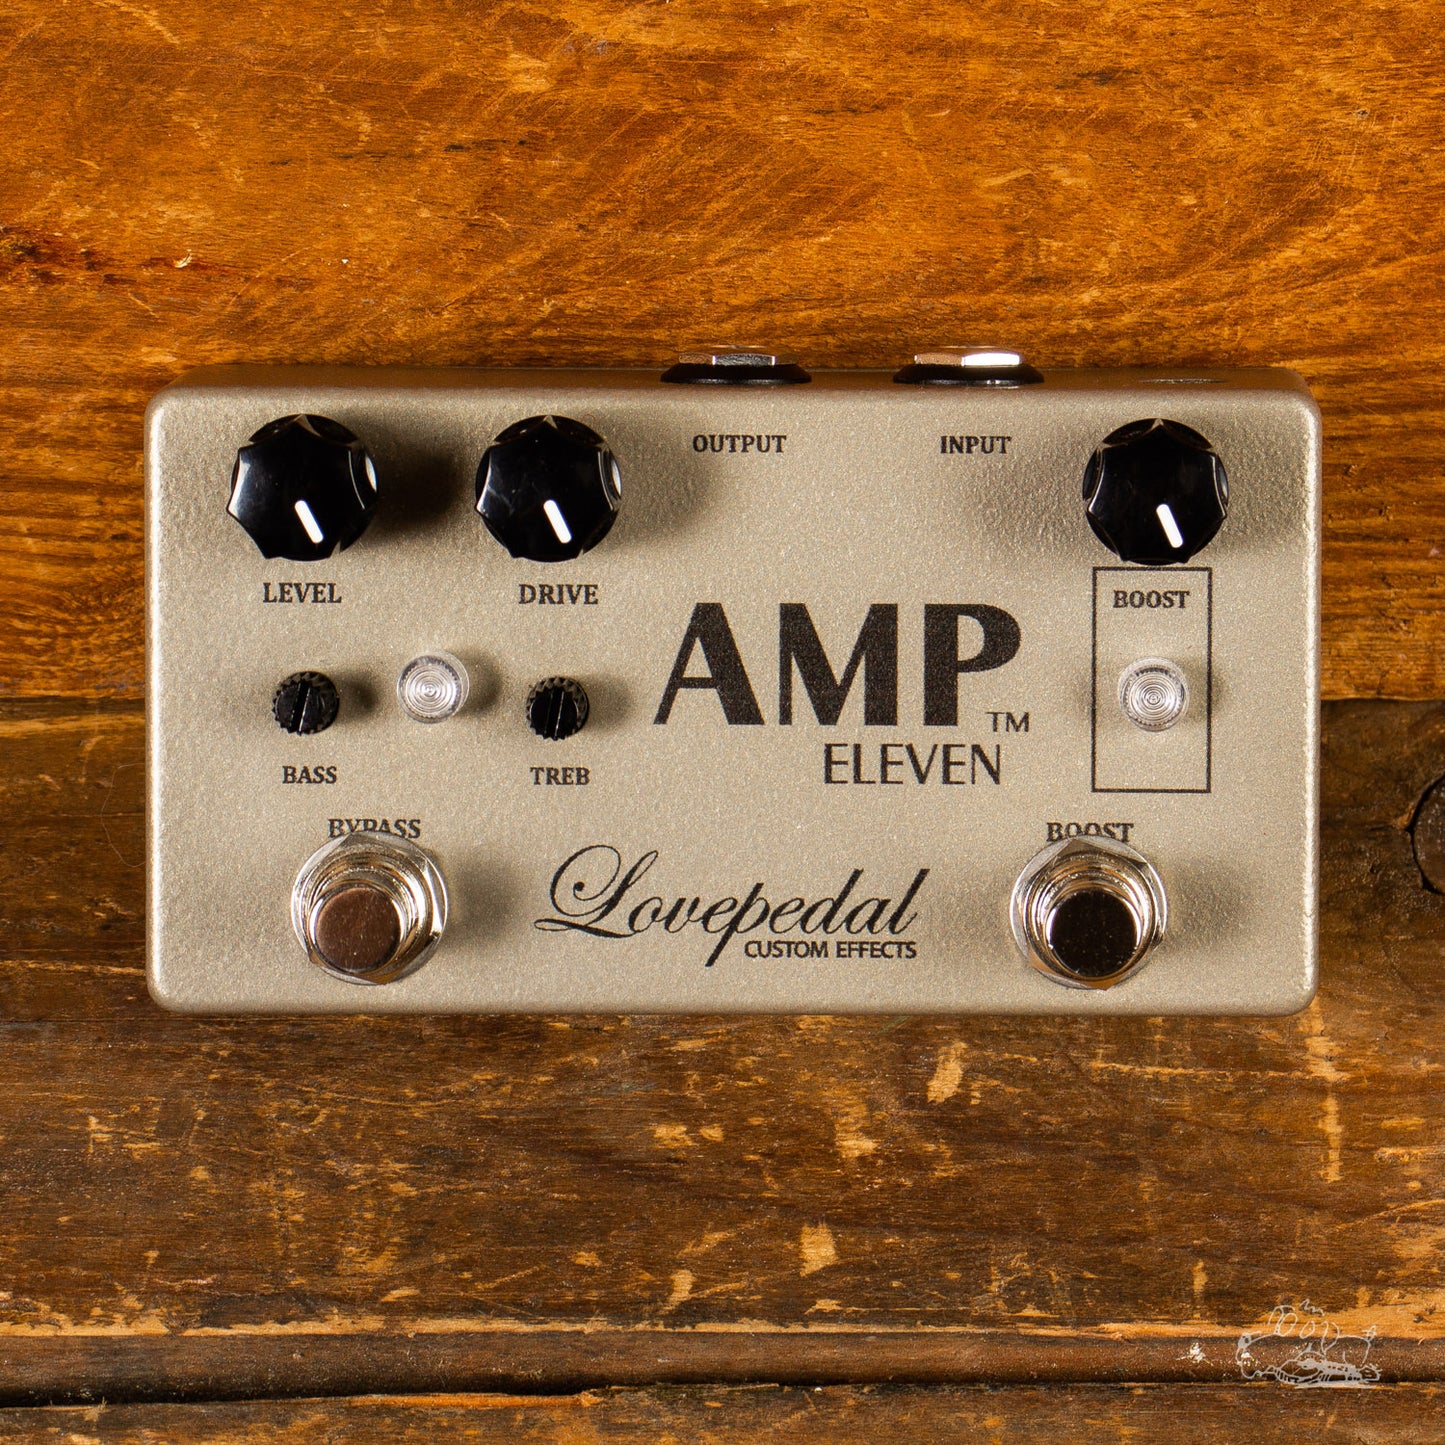 Lovepedal Custom Effects - Amp Eleven Boost and Drive